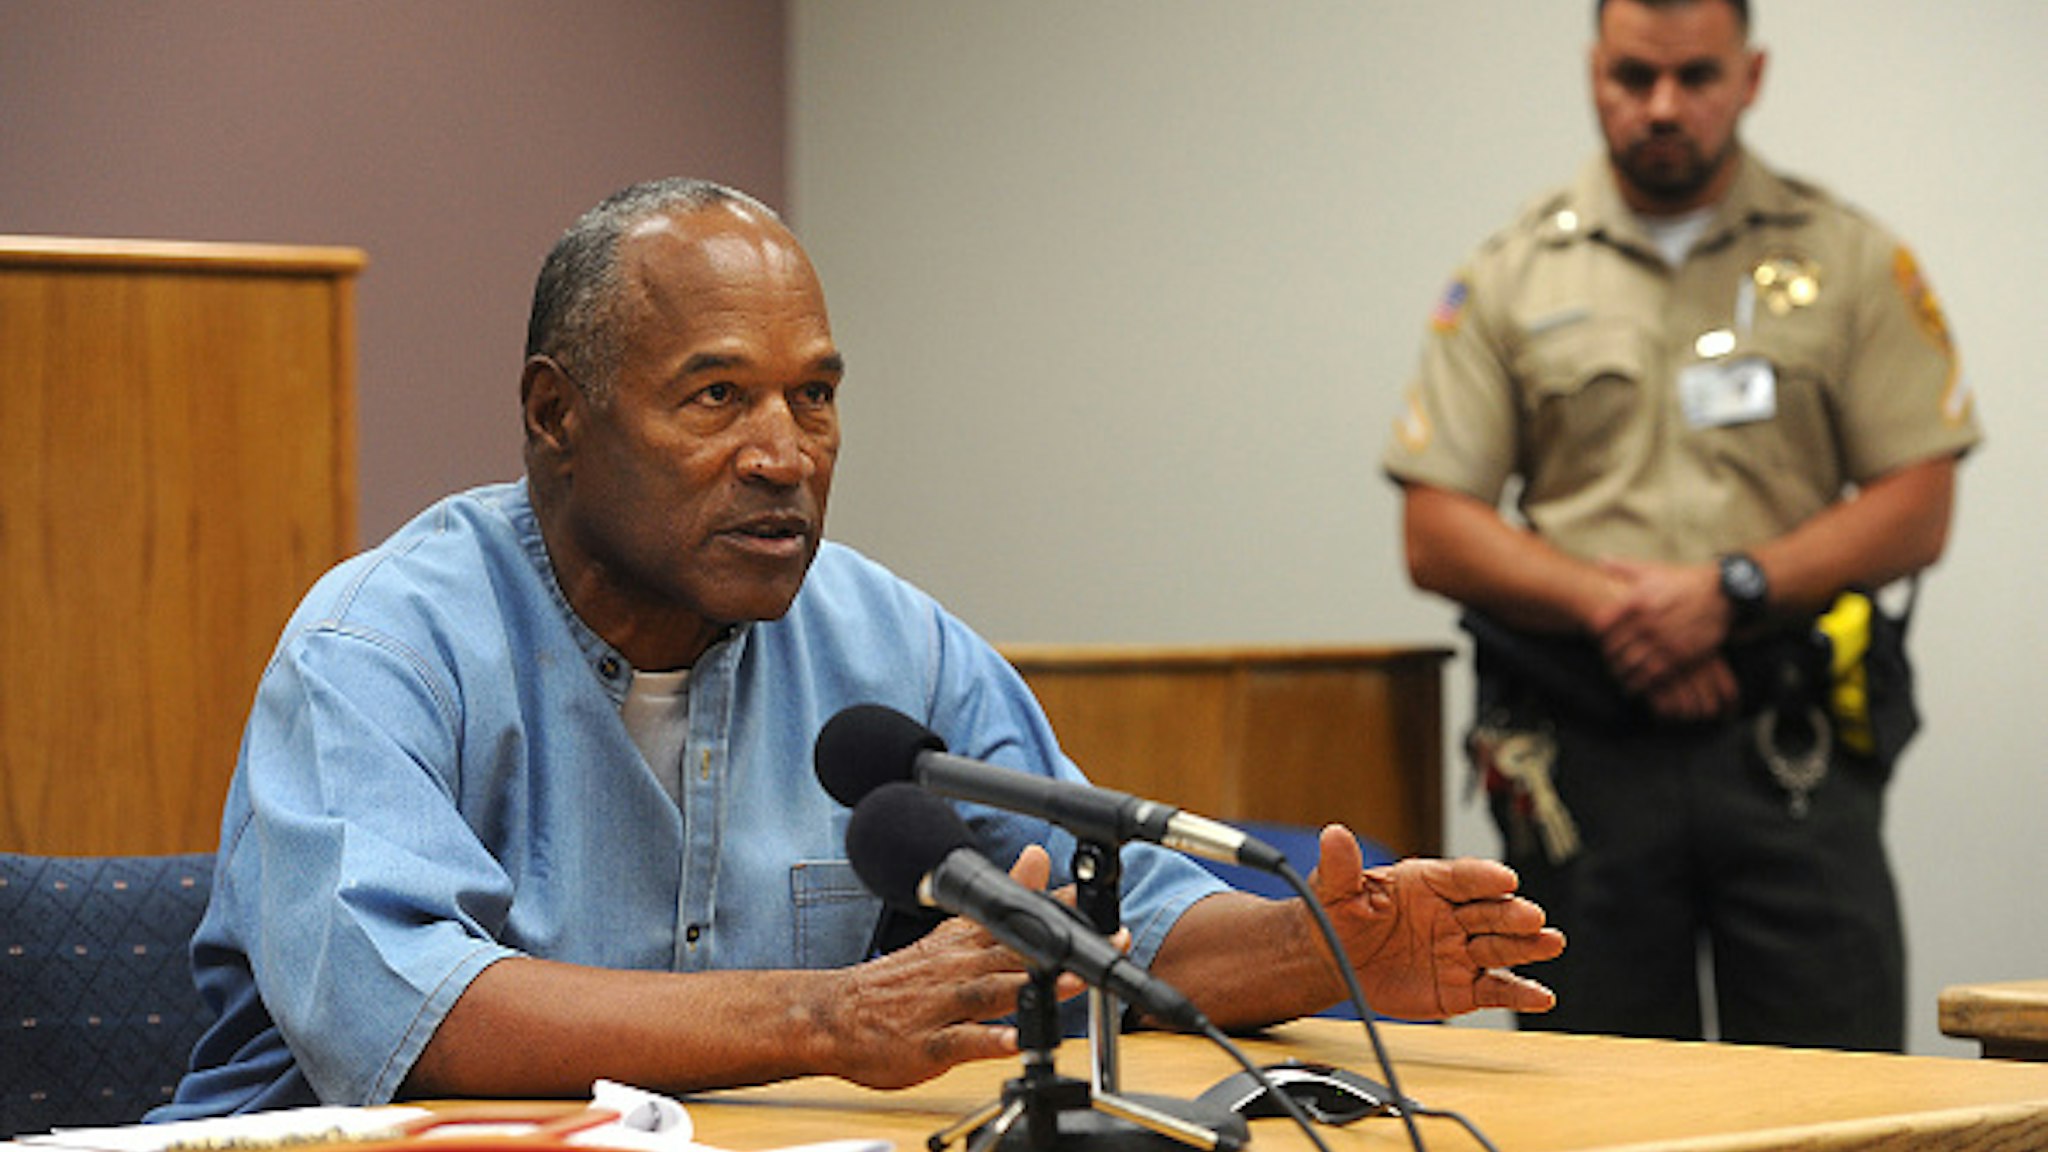 Former professional football player O.J. Simpson speaks during a parole hearing at Lovelock Correctional Center in Lovelock, Nevada, U.S., on Thursday, July 20, 2017. Simpson has been granted parole nine years into a 33-year sentence and could be released as soon as Oct. 1.